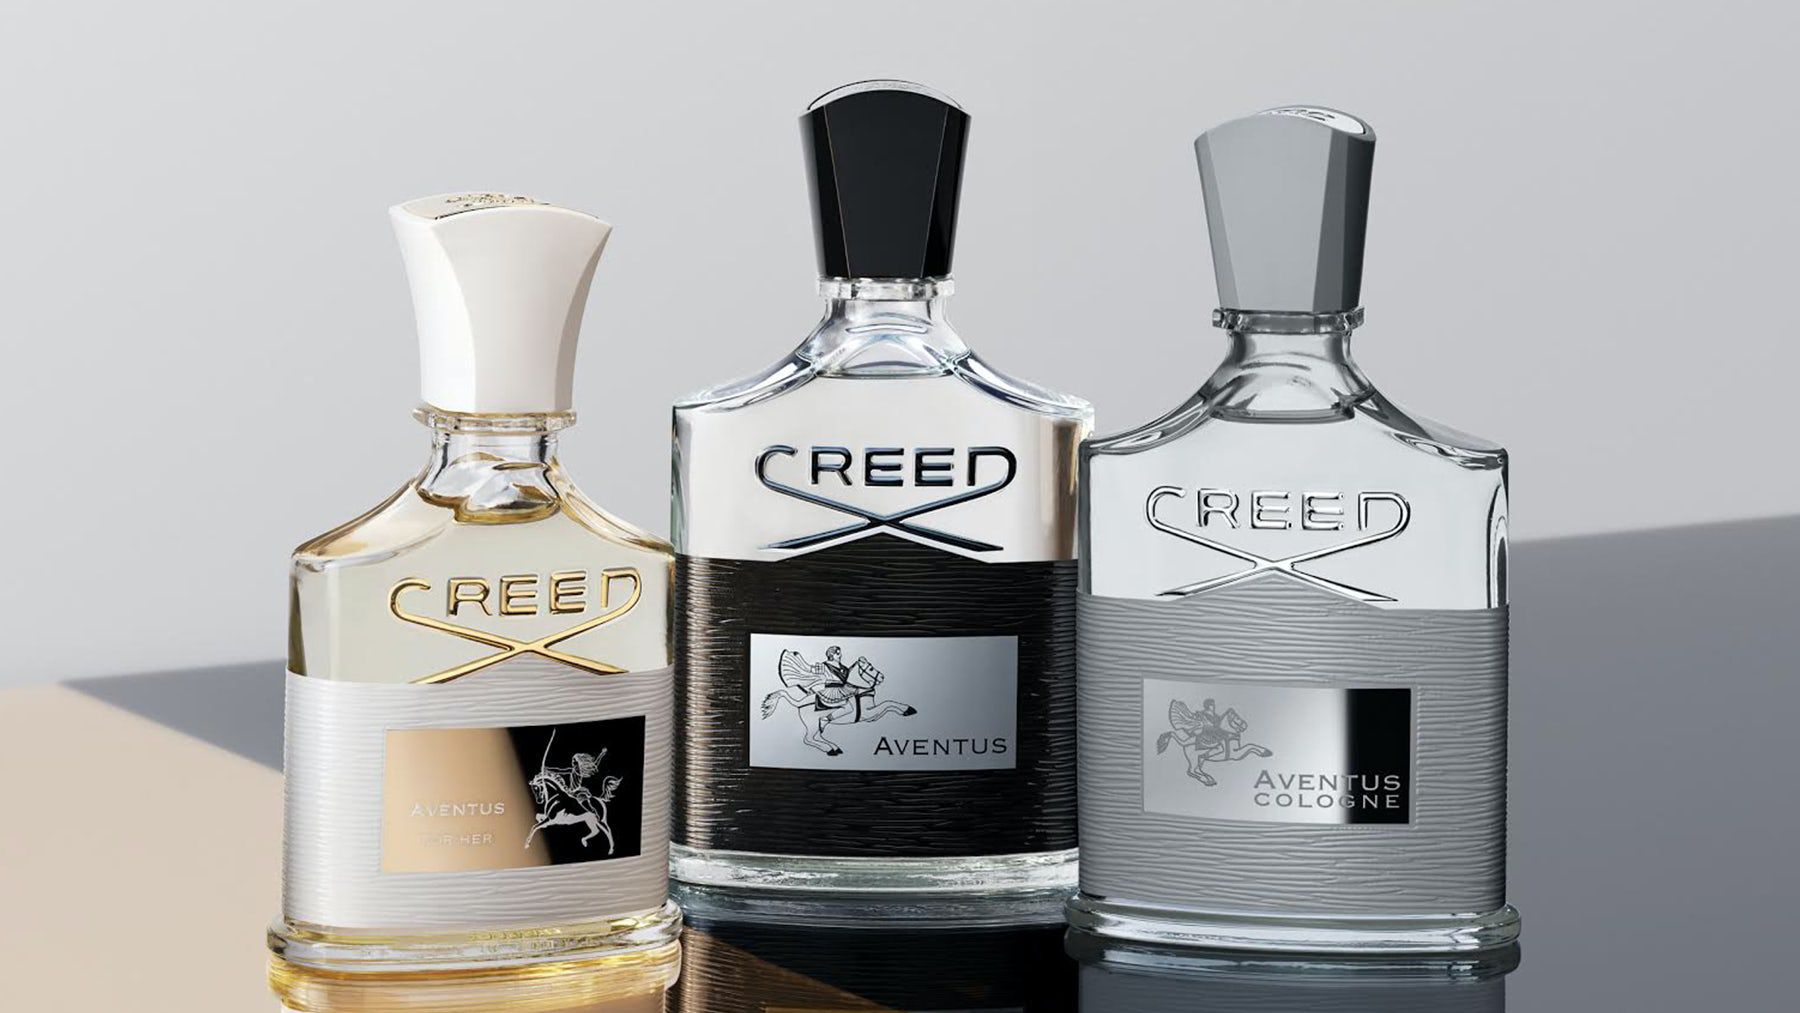 Kering Paid $3.8 Billion for Creed